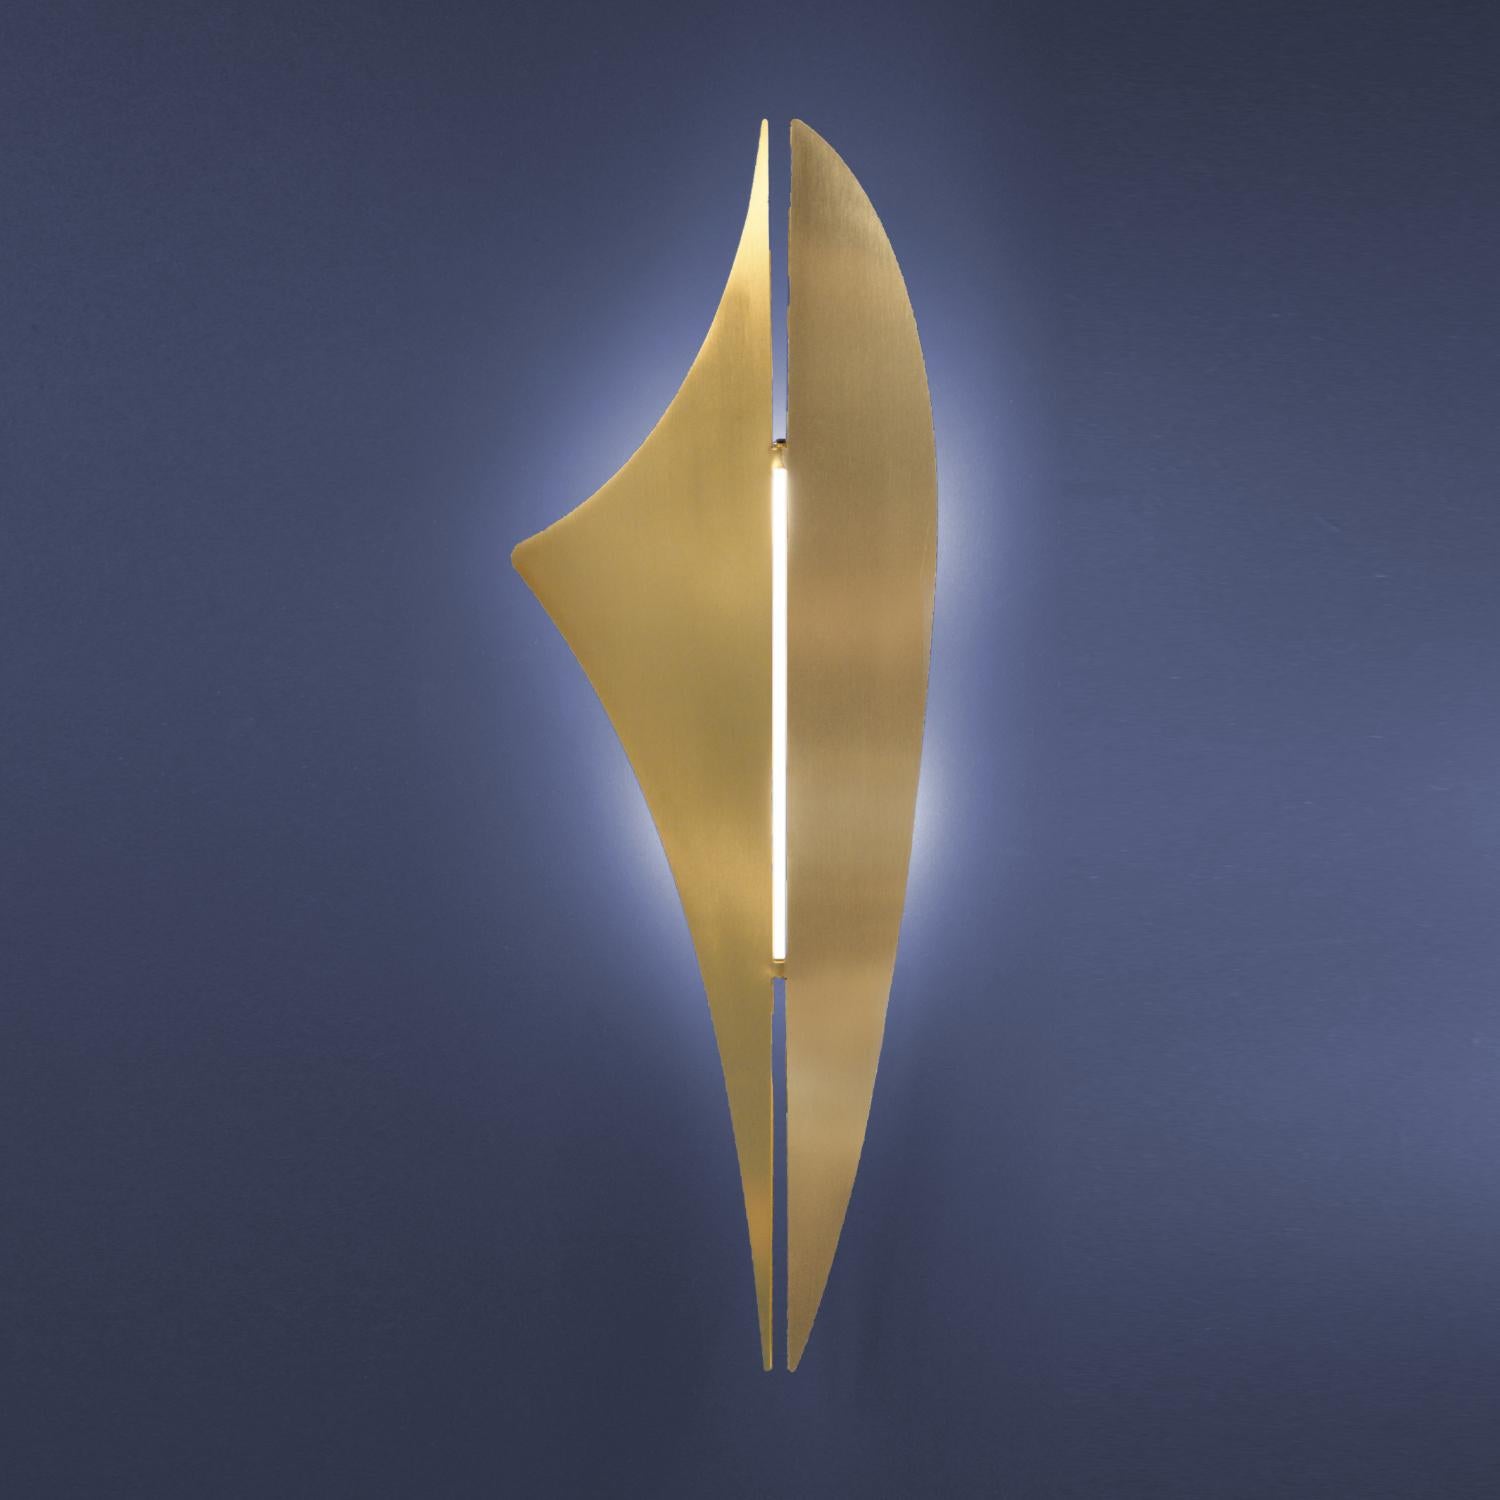 The REY wall light in brushed brass is a contemporary wall light that is designed to be as beautiful lit as it is unlit. 

The sculptural light works beautifully as a pair or either side of a mirror or wall. 

Available wired for the US.

Inspired